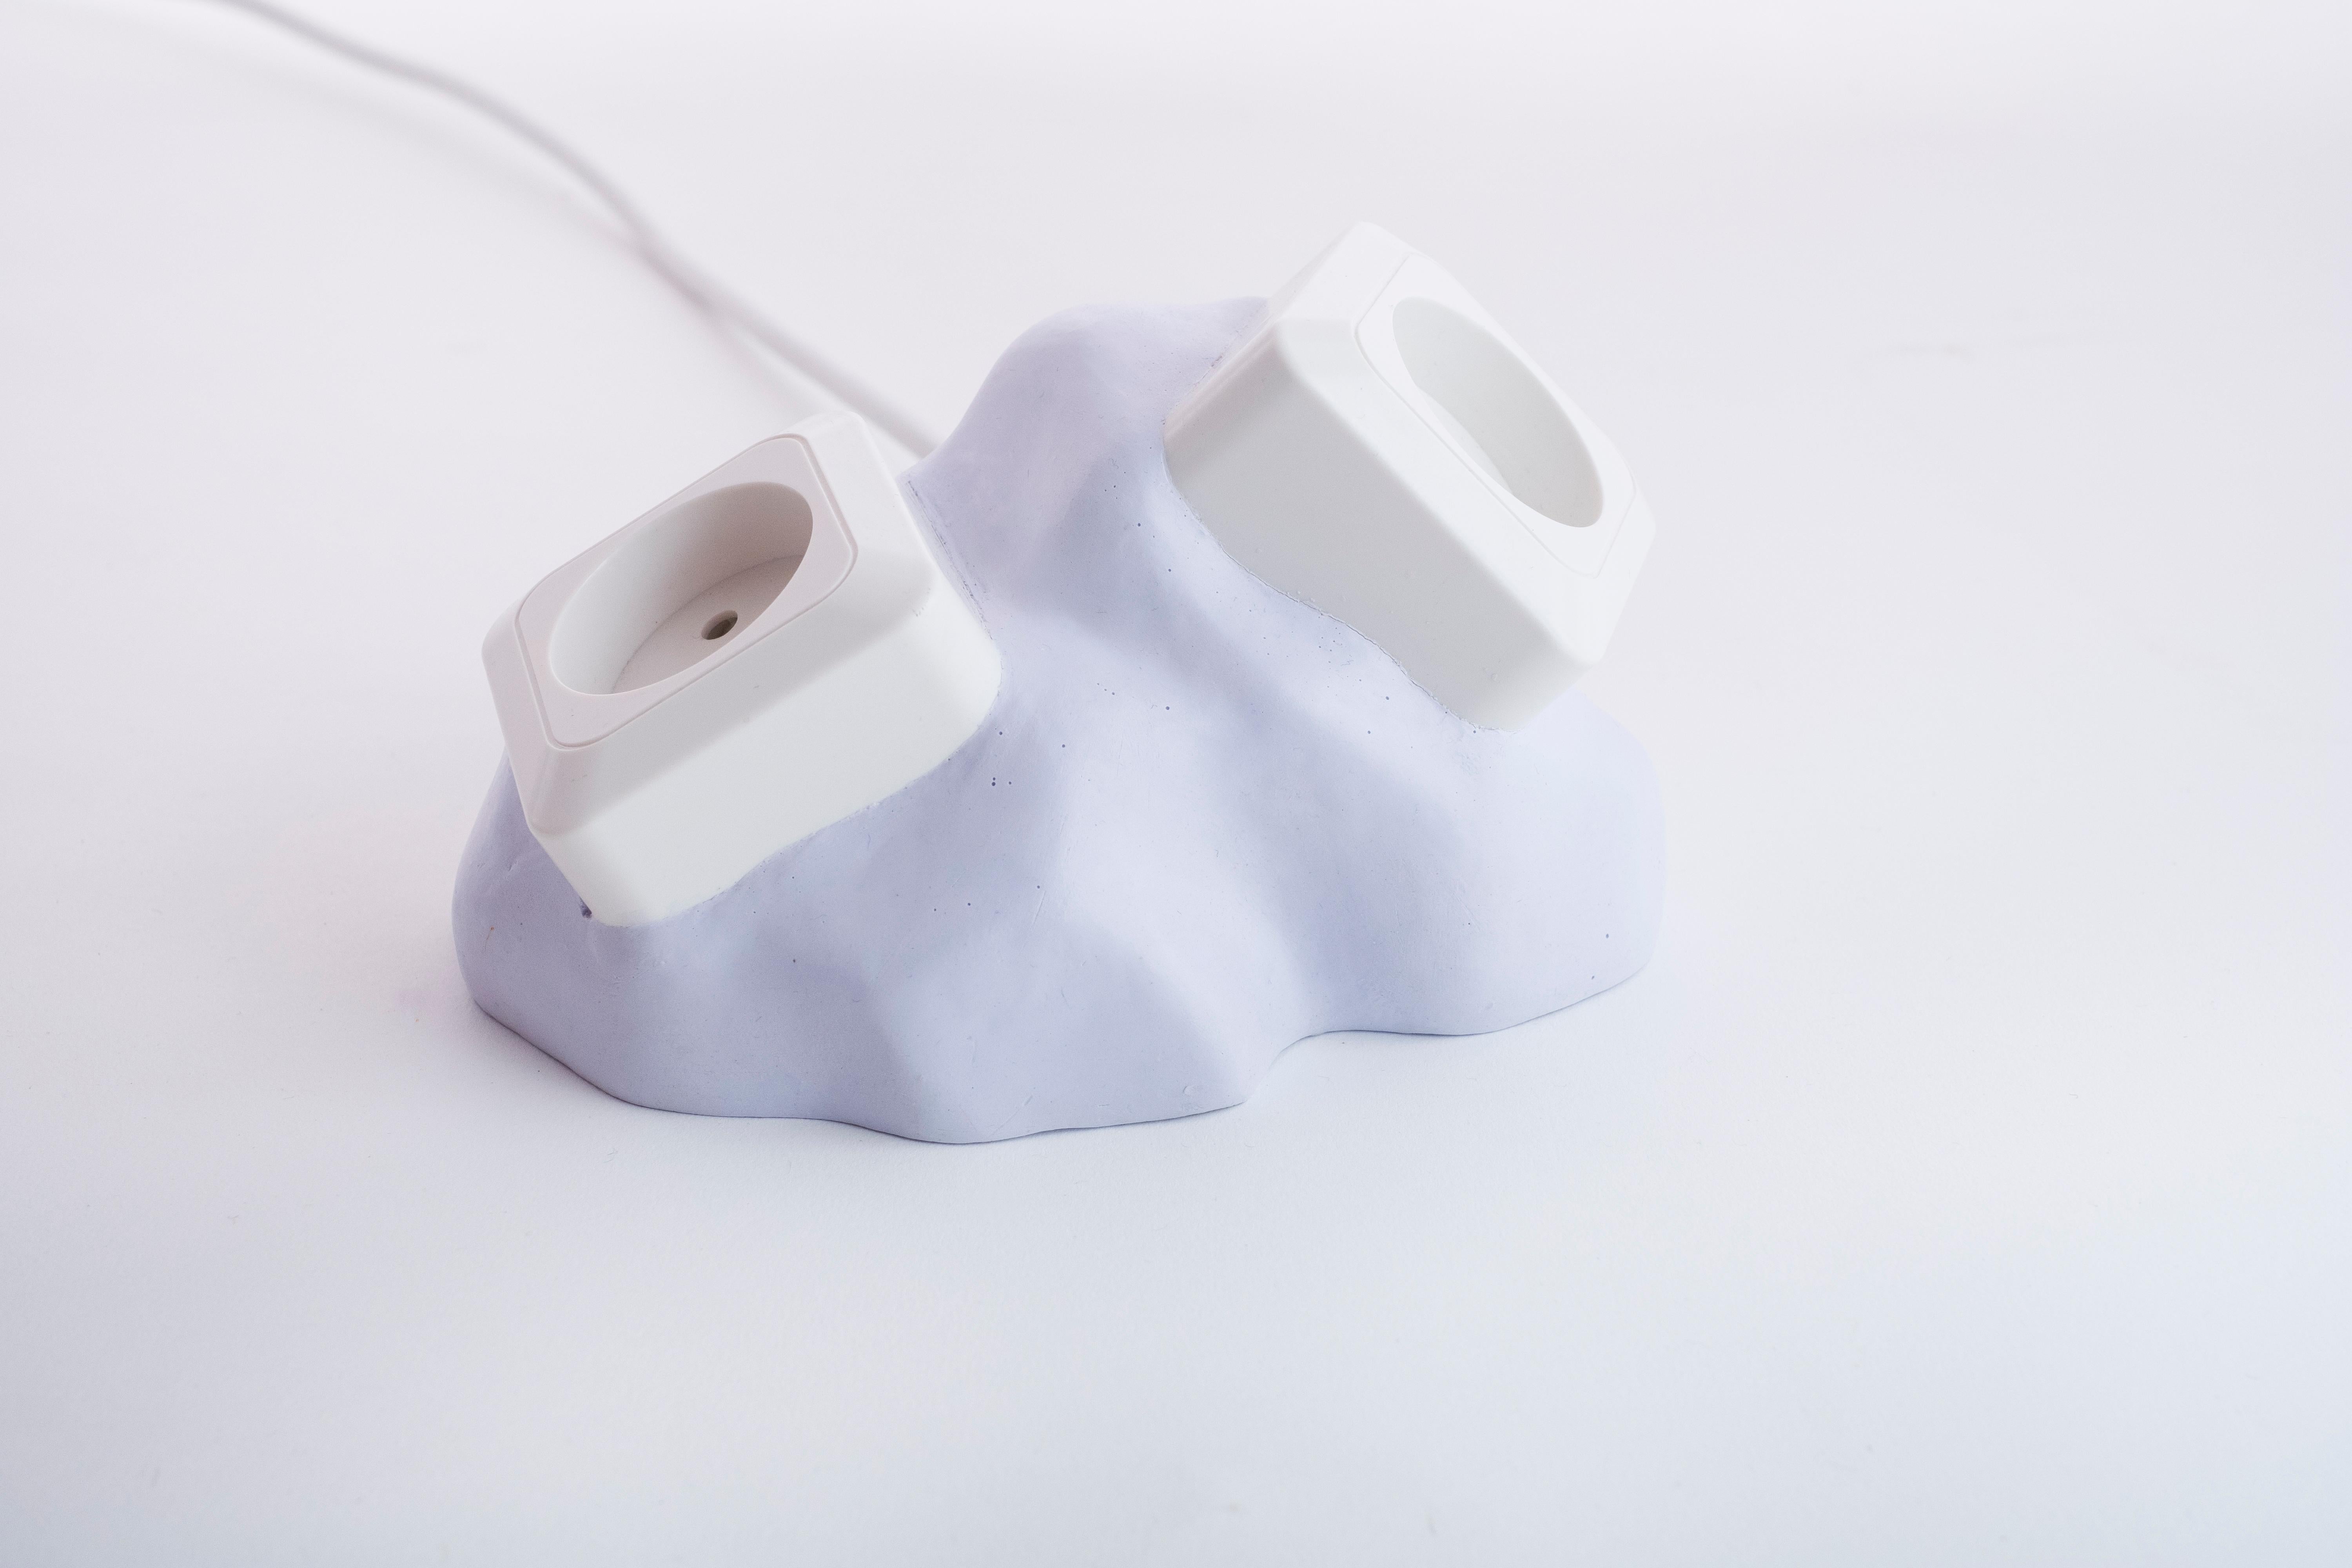 Double socket object 9. Lila SAKER by Studio Gert Wessels, lilac. handcrafted in an organic shape and made in his studio in the Netherlands. 

In his daily practice he investigates the relationship between form and function. The result is a range